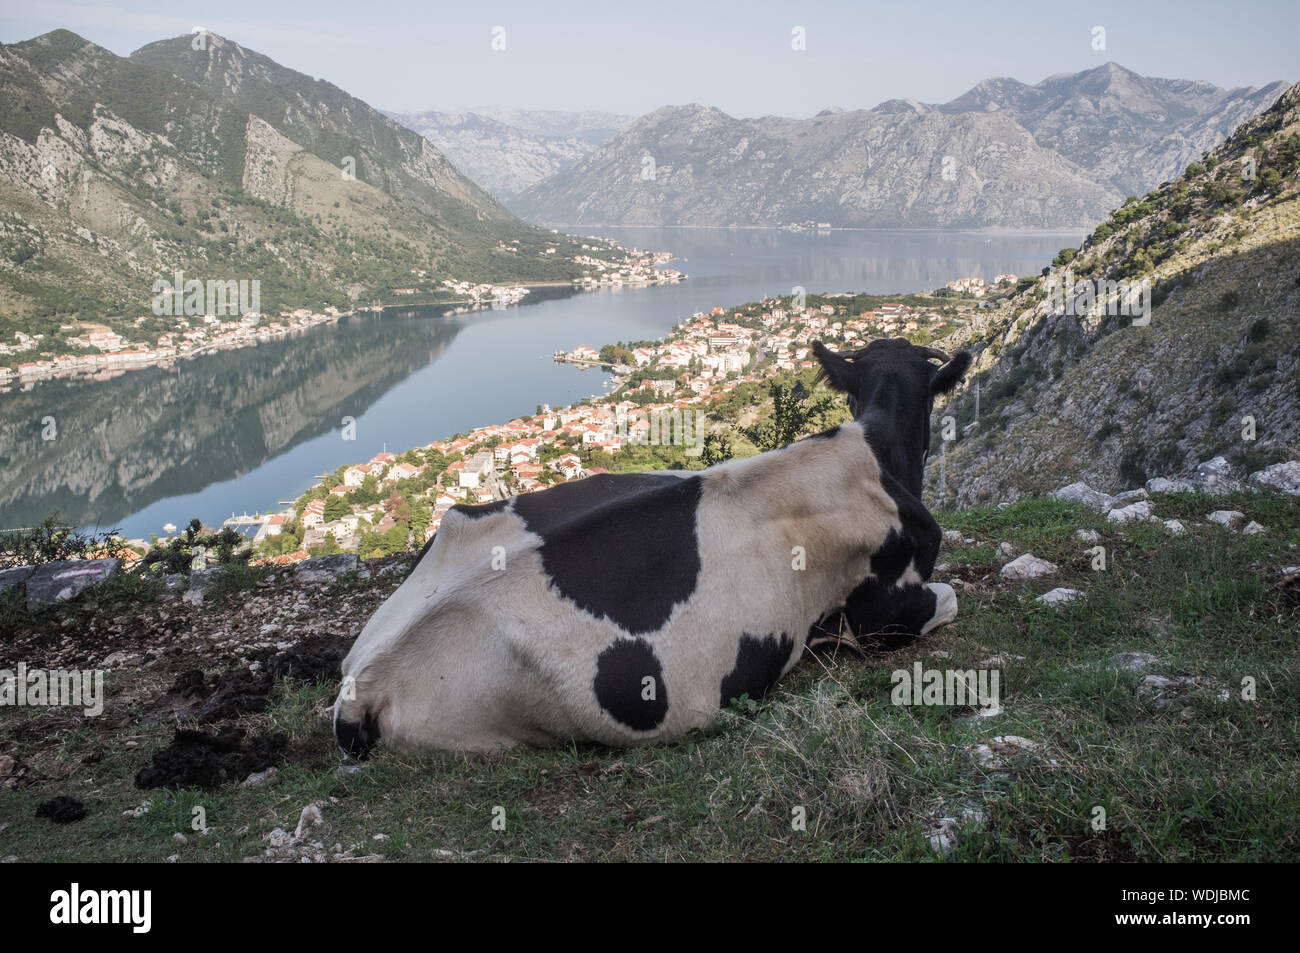 Cow Sitting On Field By Lake Against Mountains Stock Photo